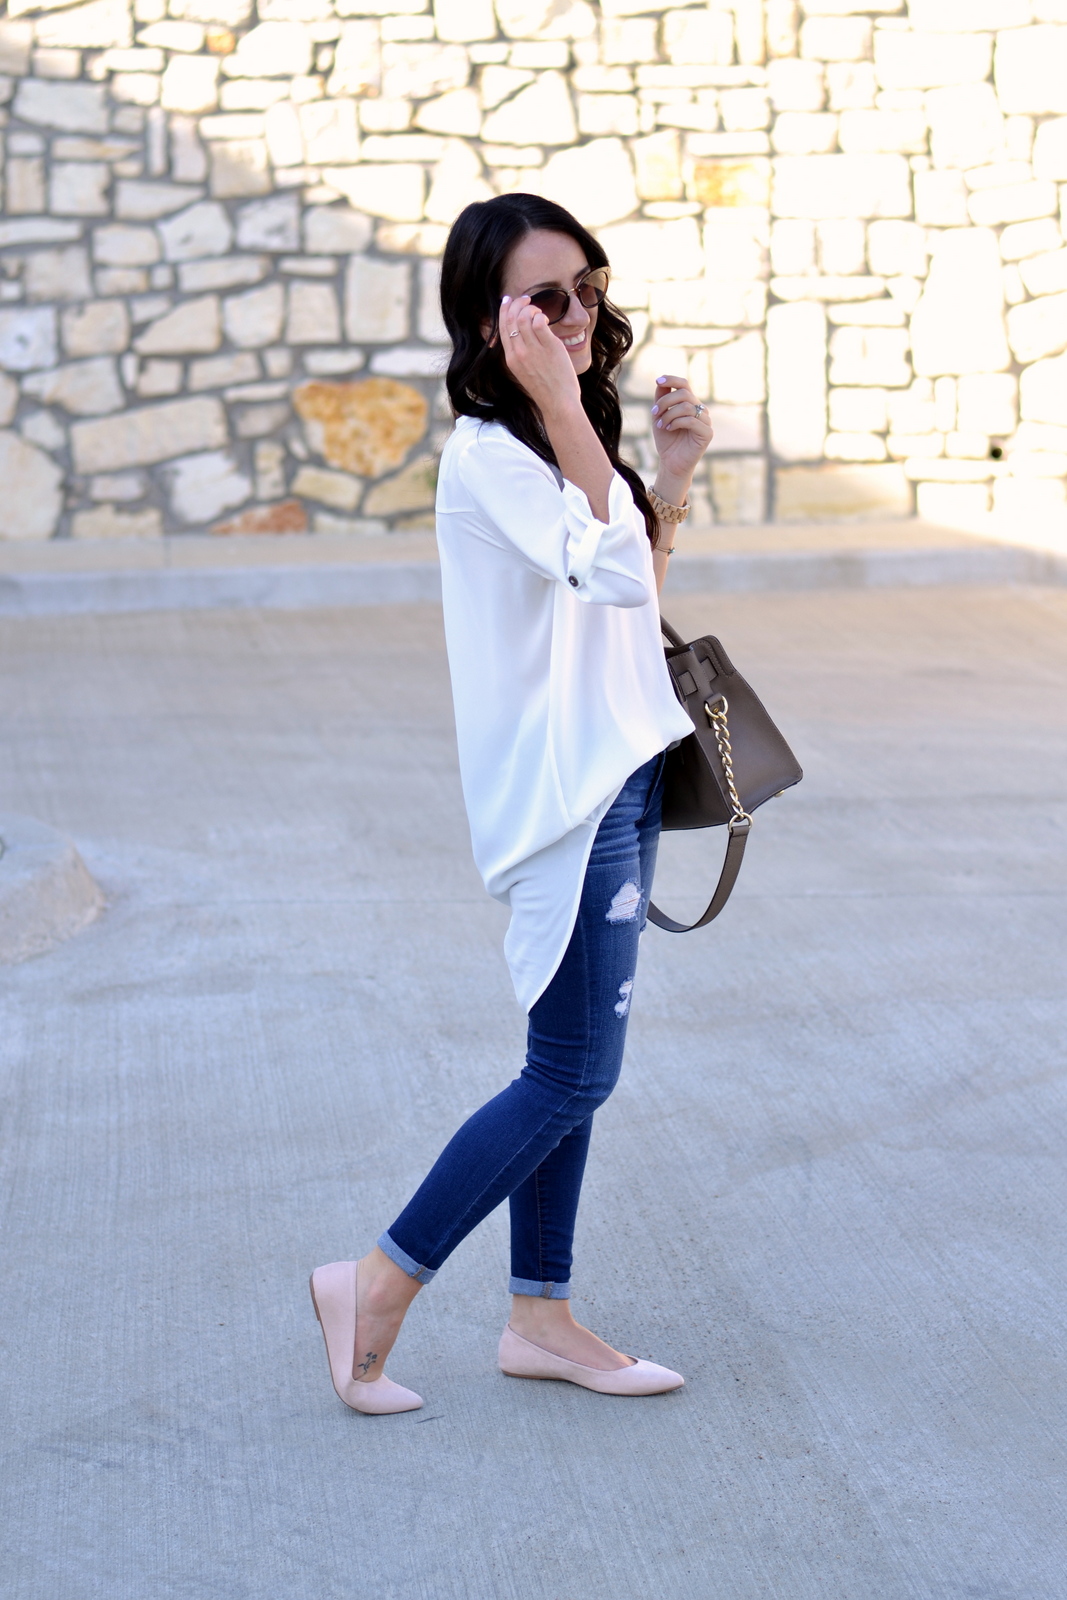 White Tunic, Distressed Denim and nude flats for a casual day look